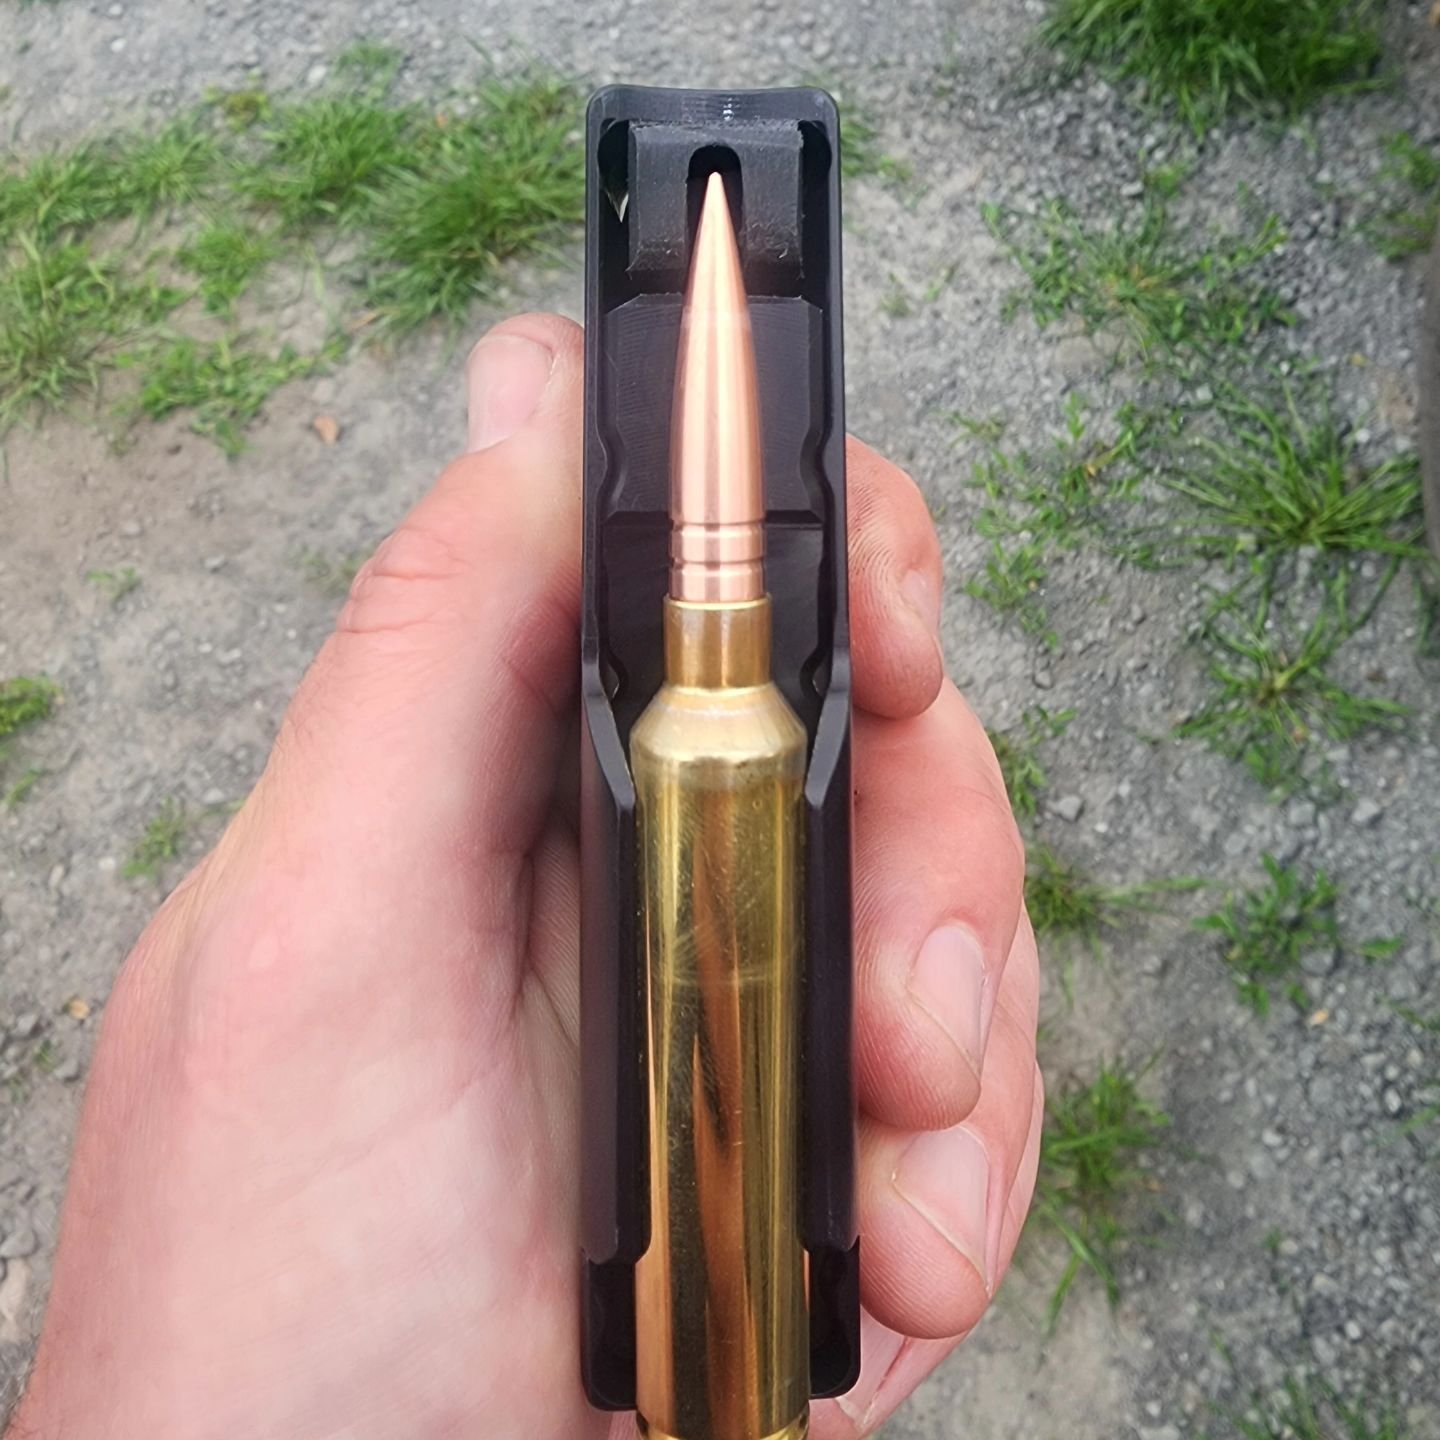 For the time being, we are offering magazine upgrades to any customers. This upgrade stops single feed/magazine sensitive bullets from having tips damaged due to recoil. All we need is a dummy round and your magazine. 

#McGuireBallistics #longshotsa